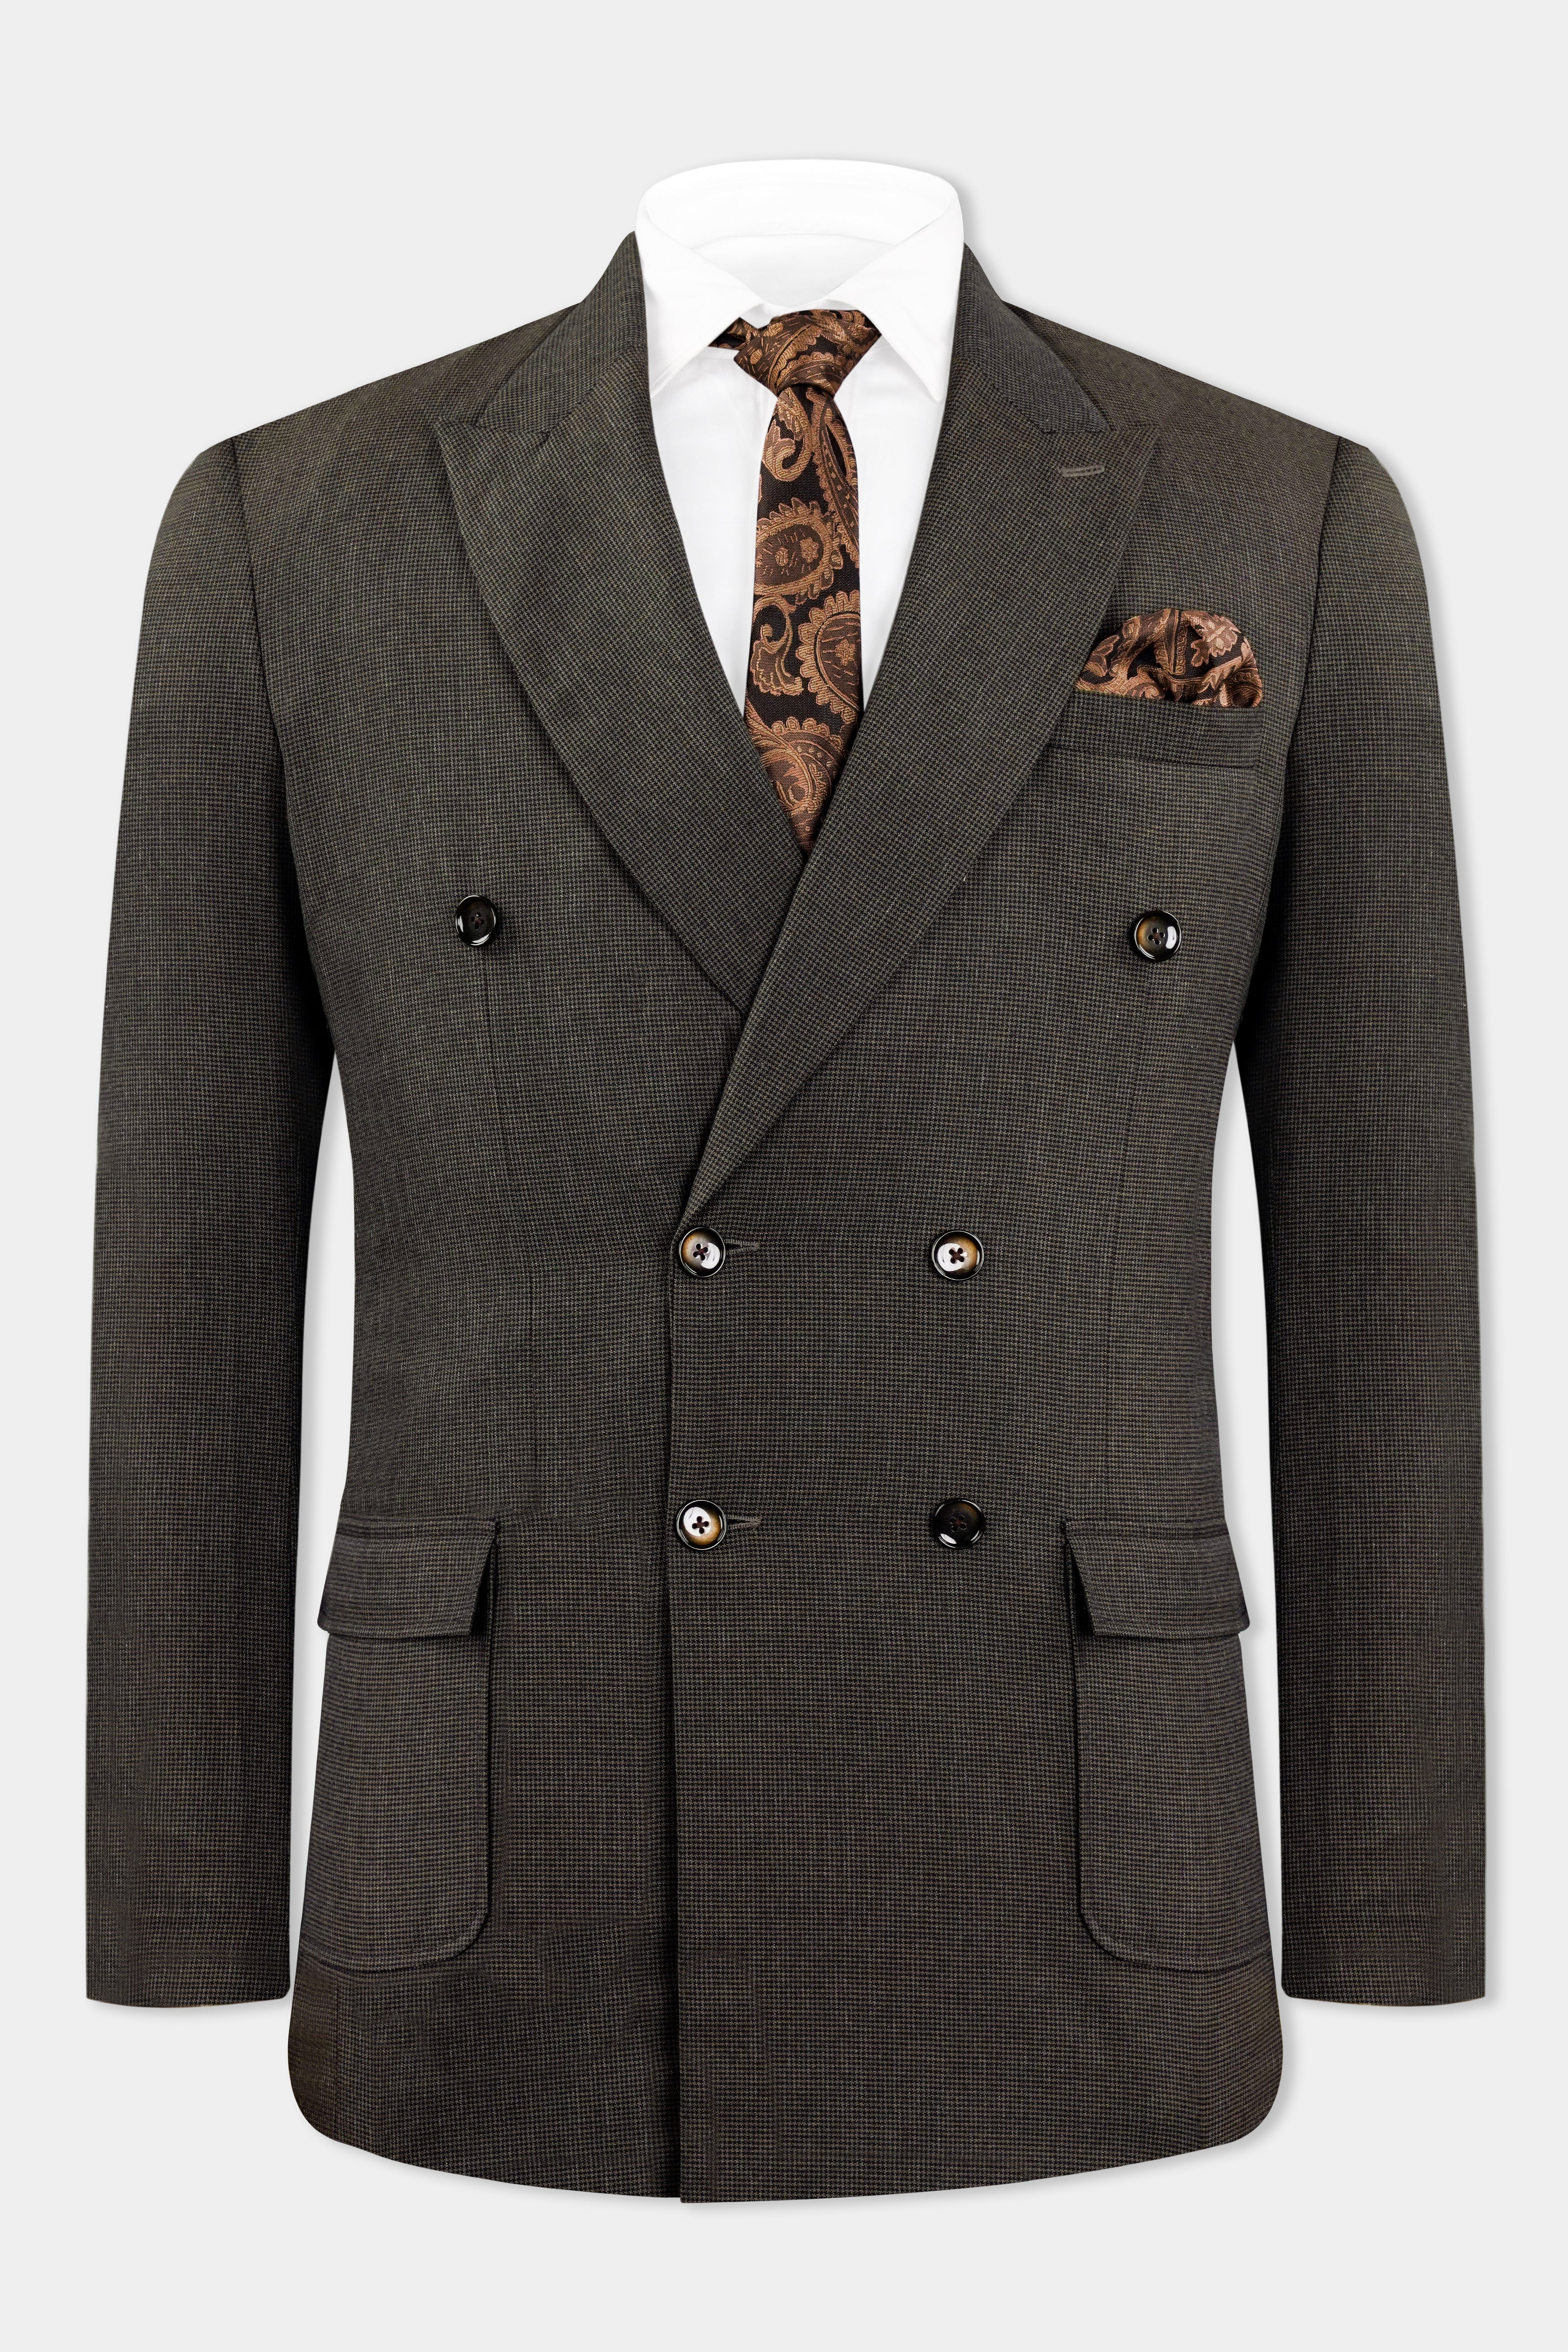 Taupe Brown Wool Rich Double Breasted Designer Blazer BL2933-DB-D74-36, BL2933-DB-D74-38, BL2933-DB-D74-40, BL2933-DB-D74-42, BL2933-DB-D74-44, BL2933-DB-D74-46, BL2933-DB-D74-48, BL2933-DB-D74-50, BL2933-DB-D74-52, BL2933-DB-D74-54, BL2933-DB-D74-56, BL2933-DB-D74-58, BL2933-DB-D74-60